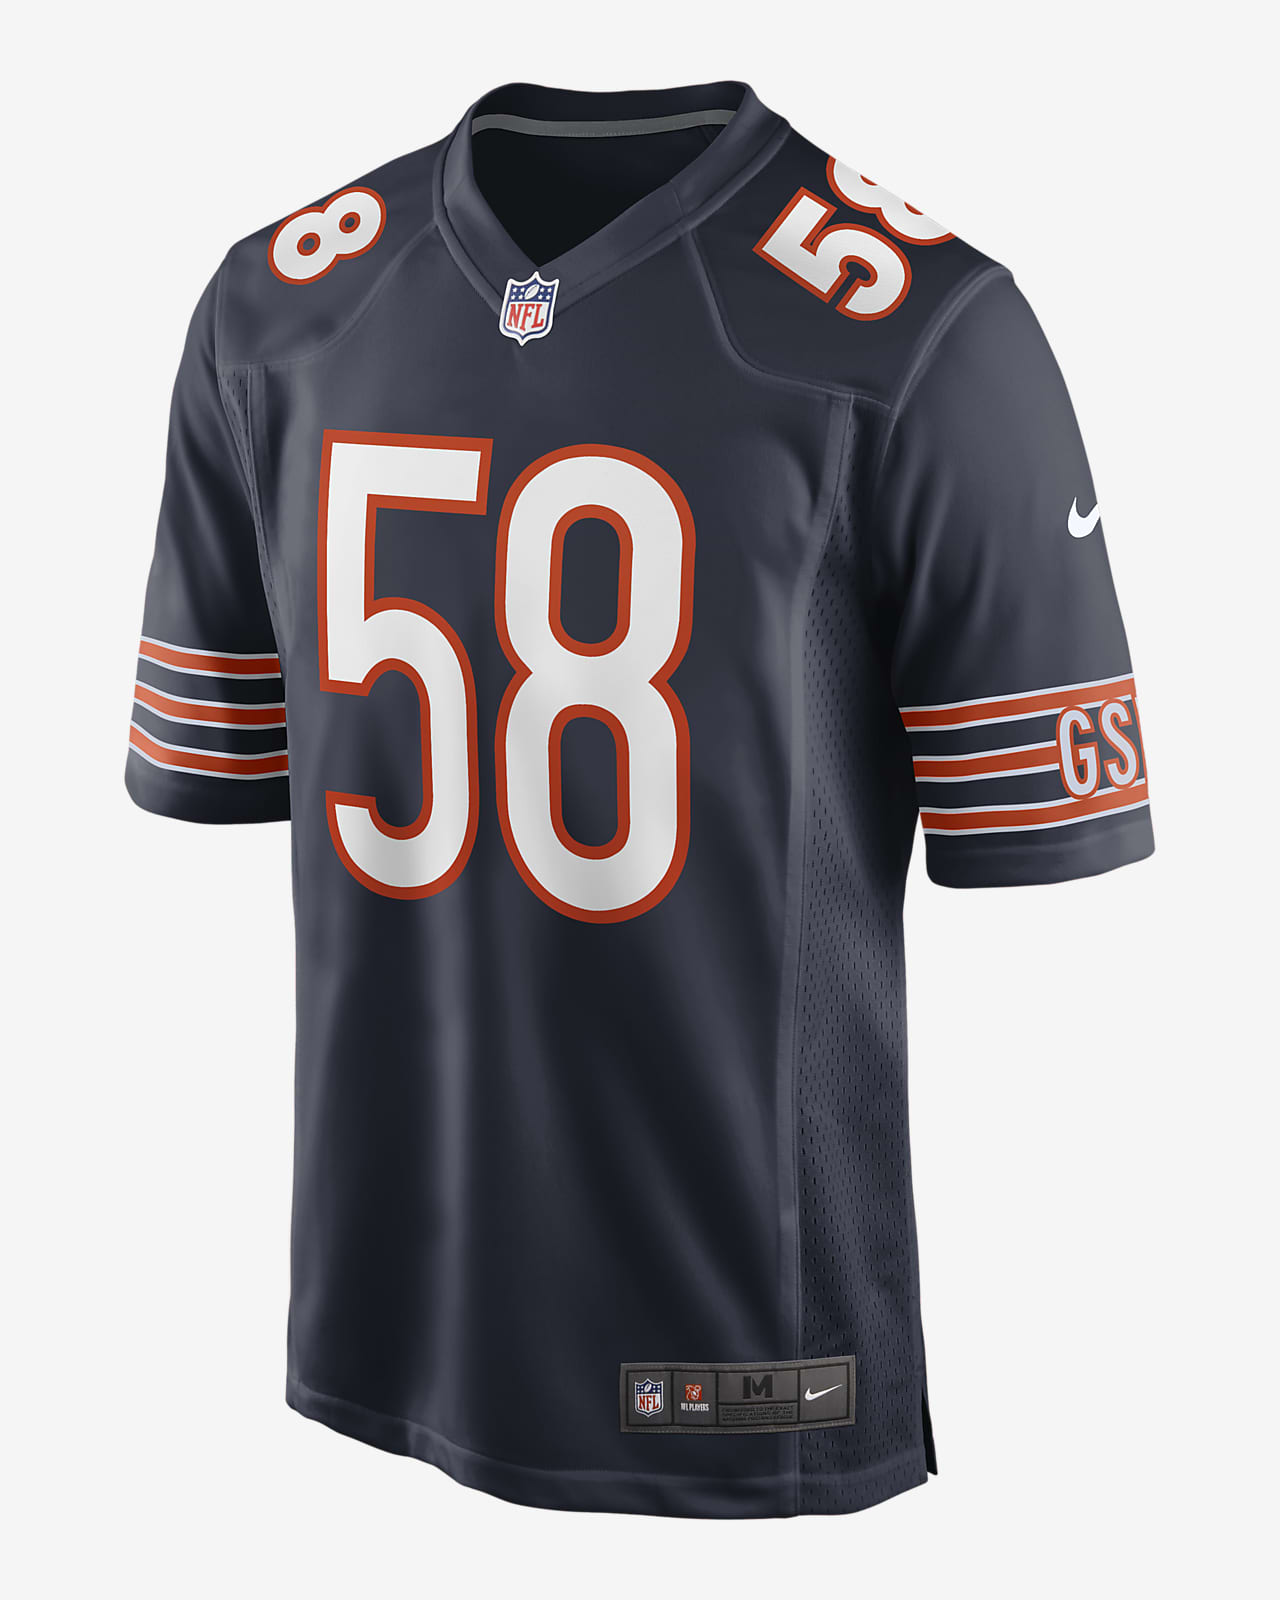 infant chicago bears outfit